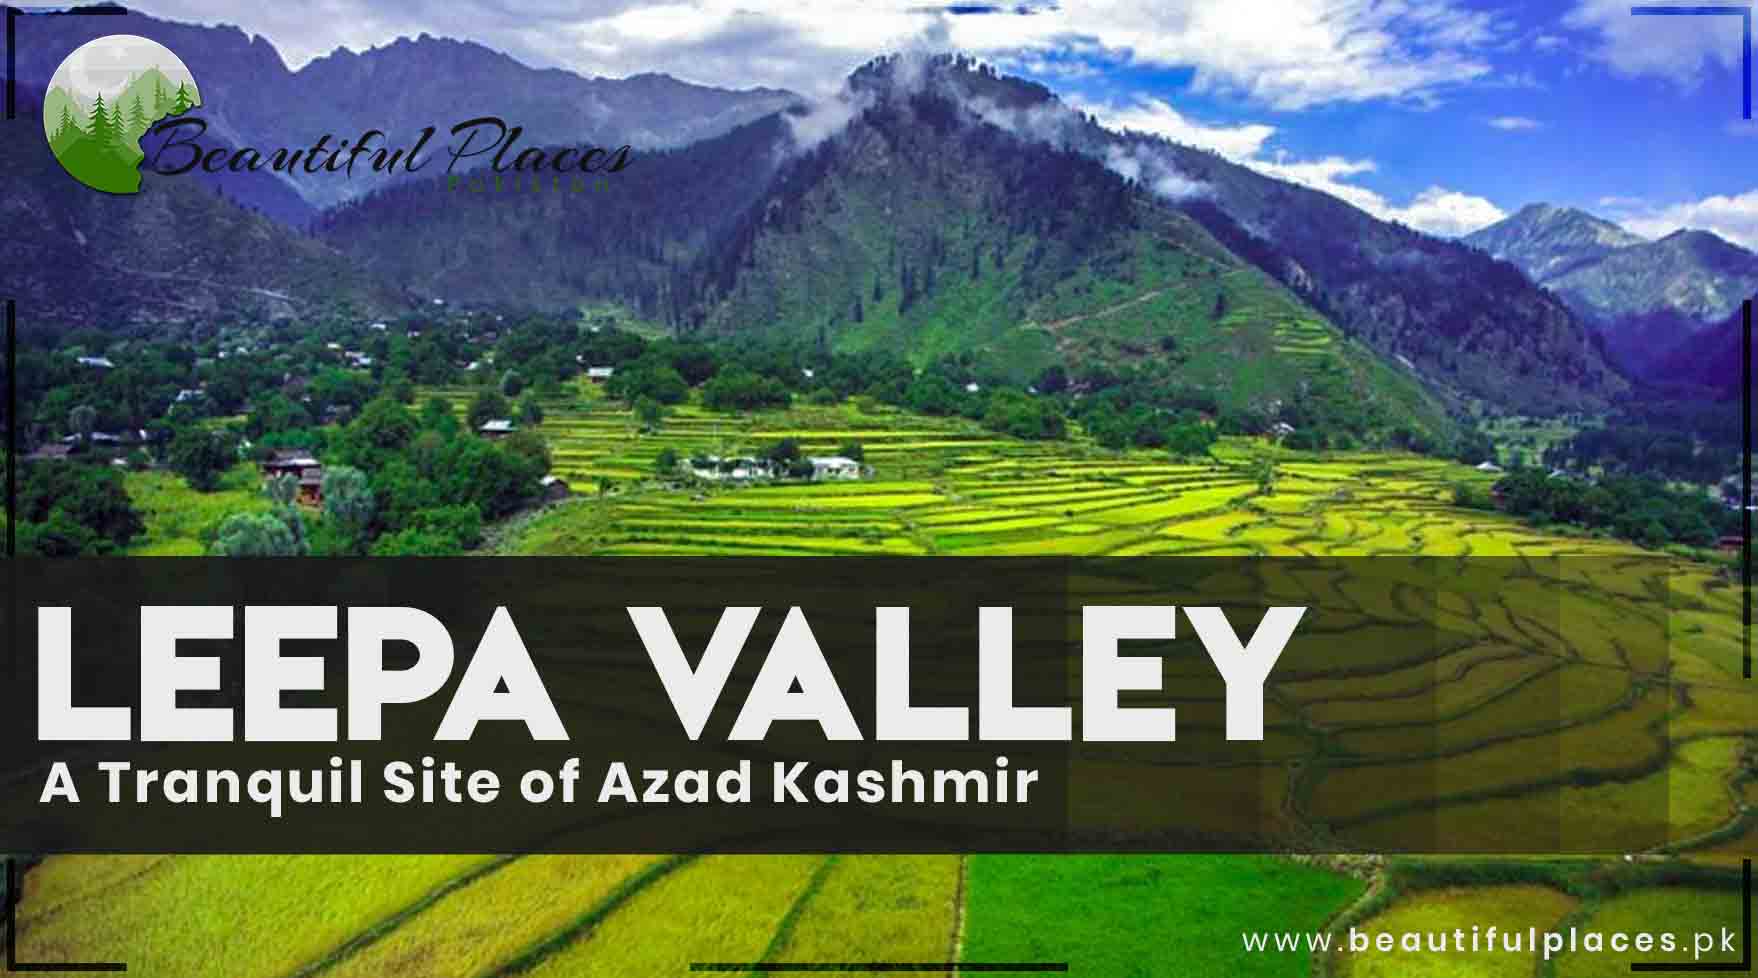 About Leepa Valley - A Tranquil Site of Azad Kashmir